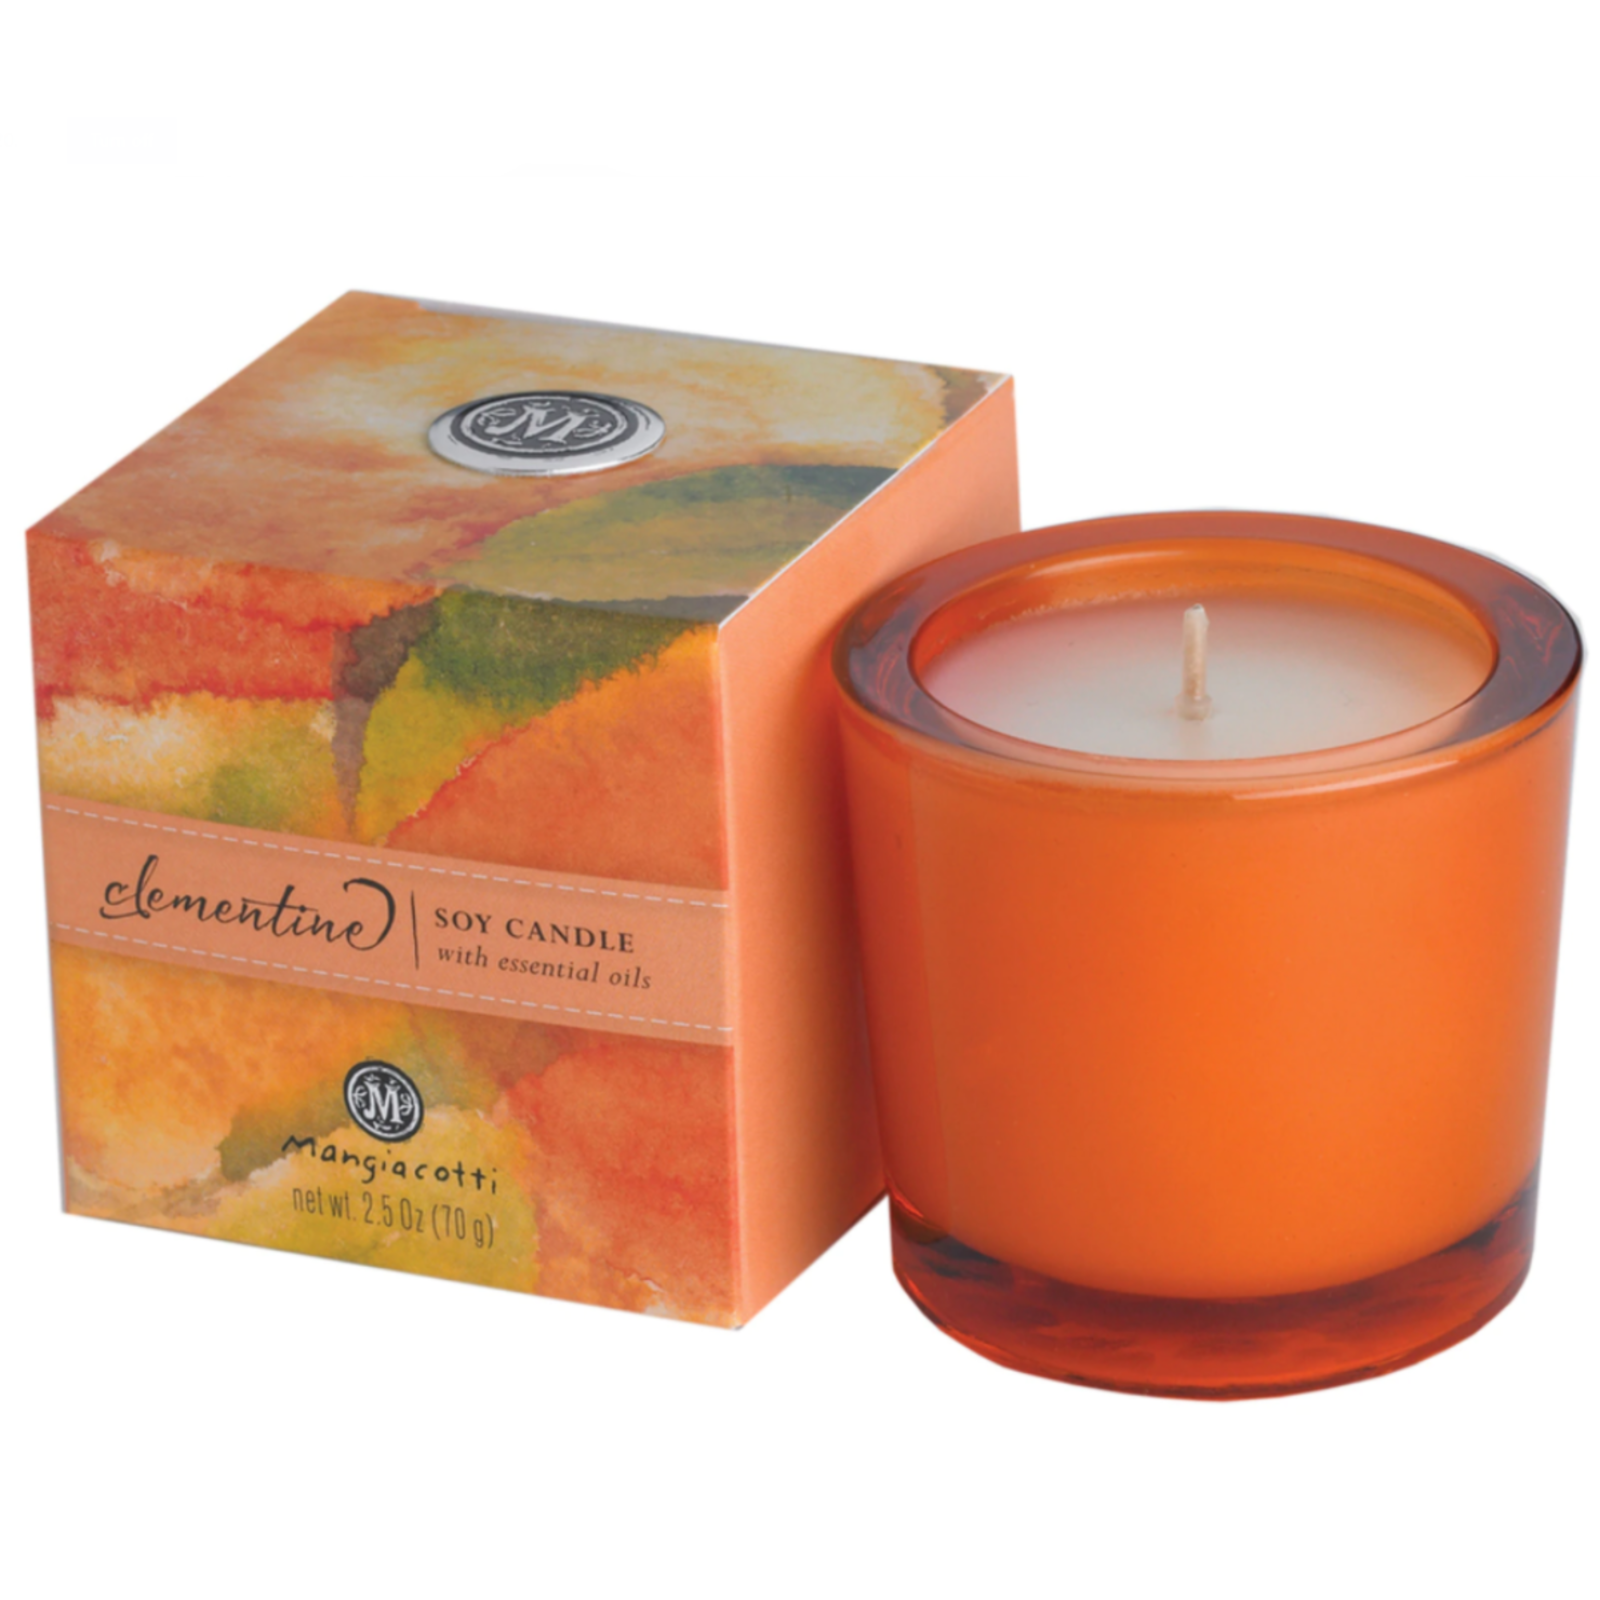 Mangiacotti Clementine Soy  Candle   20 hrs burn time   2553 loading=